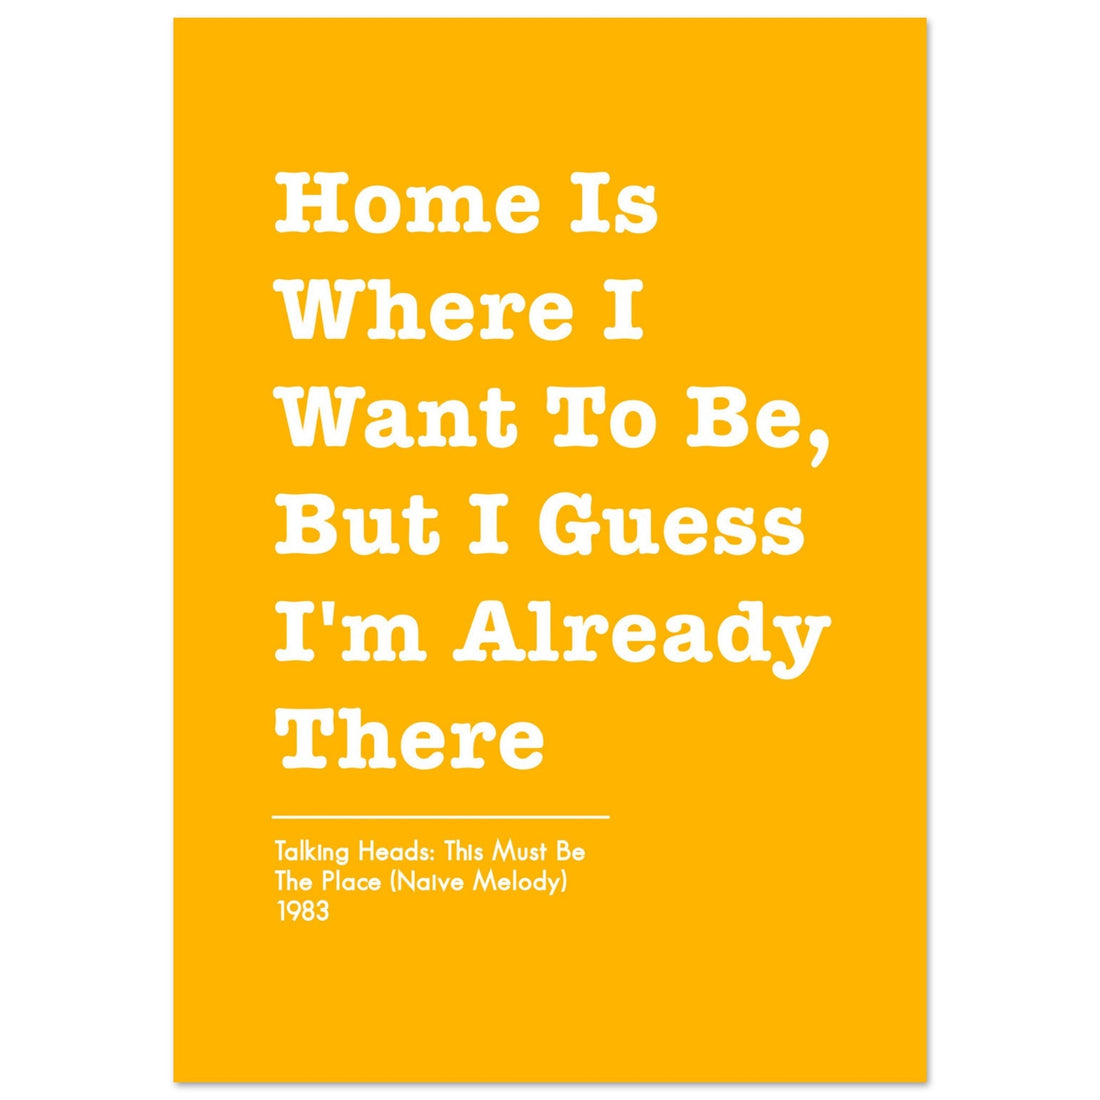 Talking Heads - This must be the place, Song Lyrics, Talking Heads, This must be the place, #illieeart